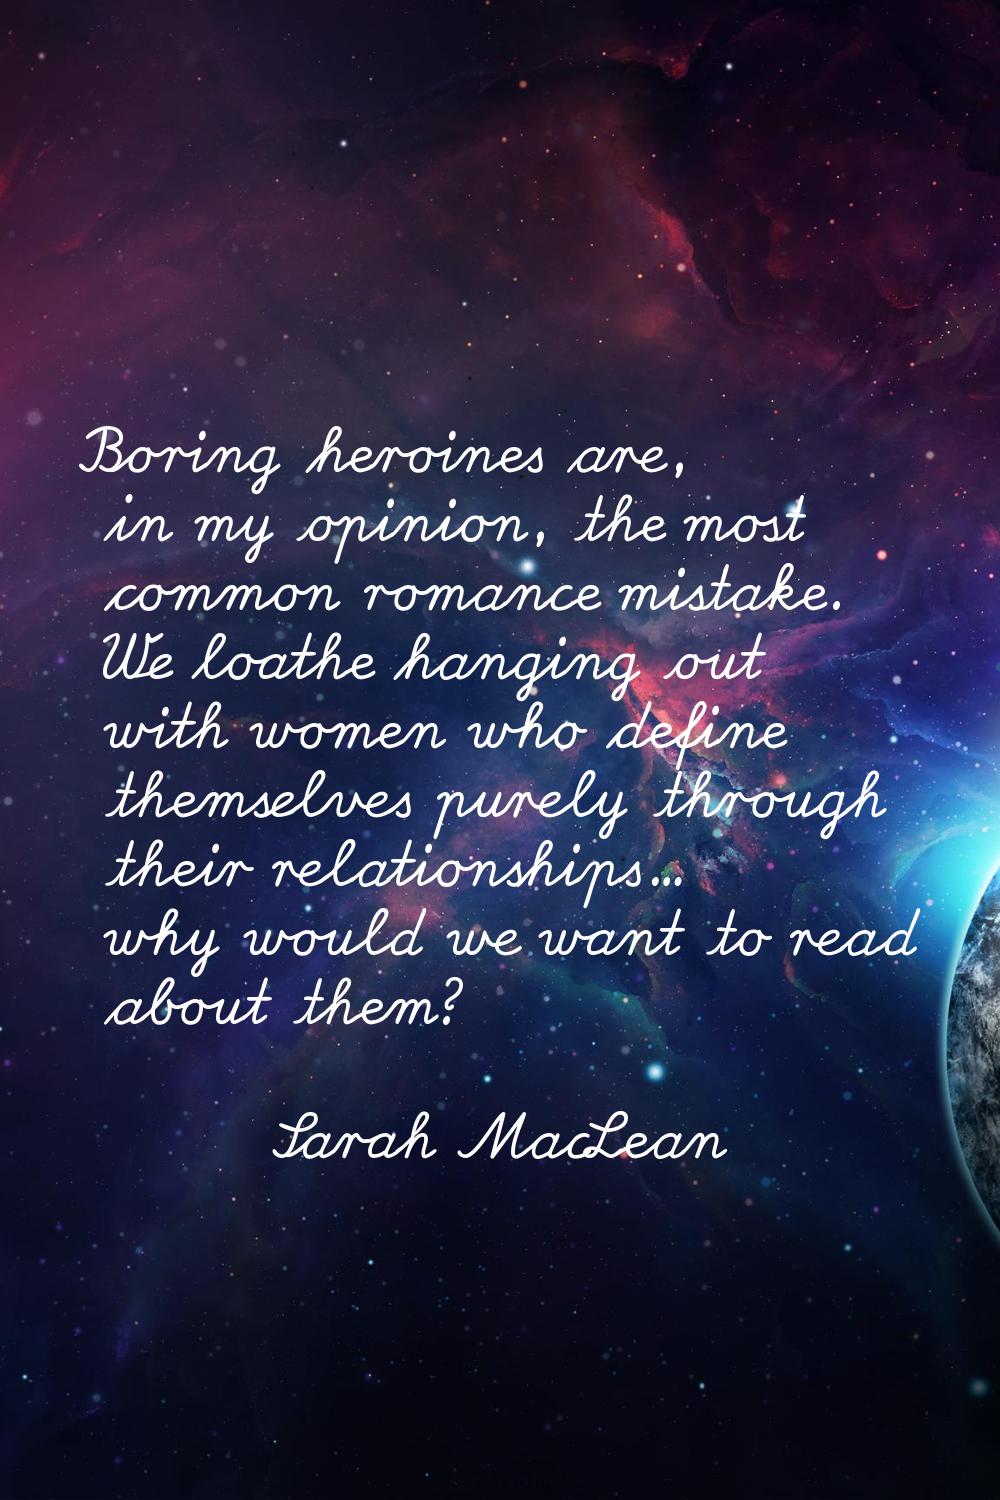 Boring heroines are, in my opinion, the most common romance mistake. We loathe hanging out with wom